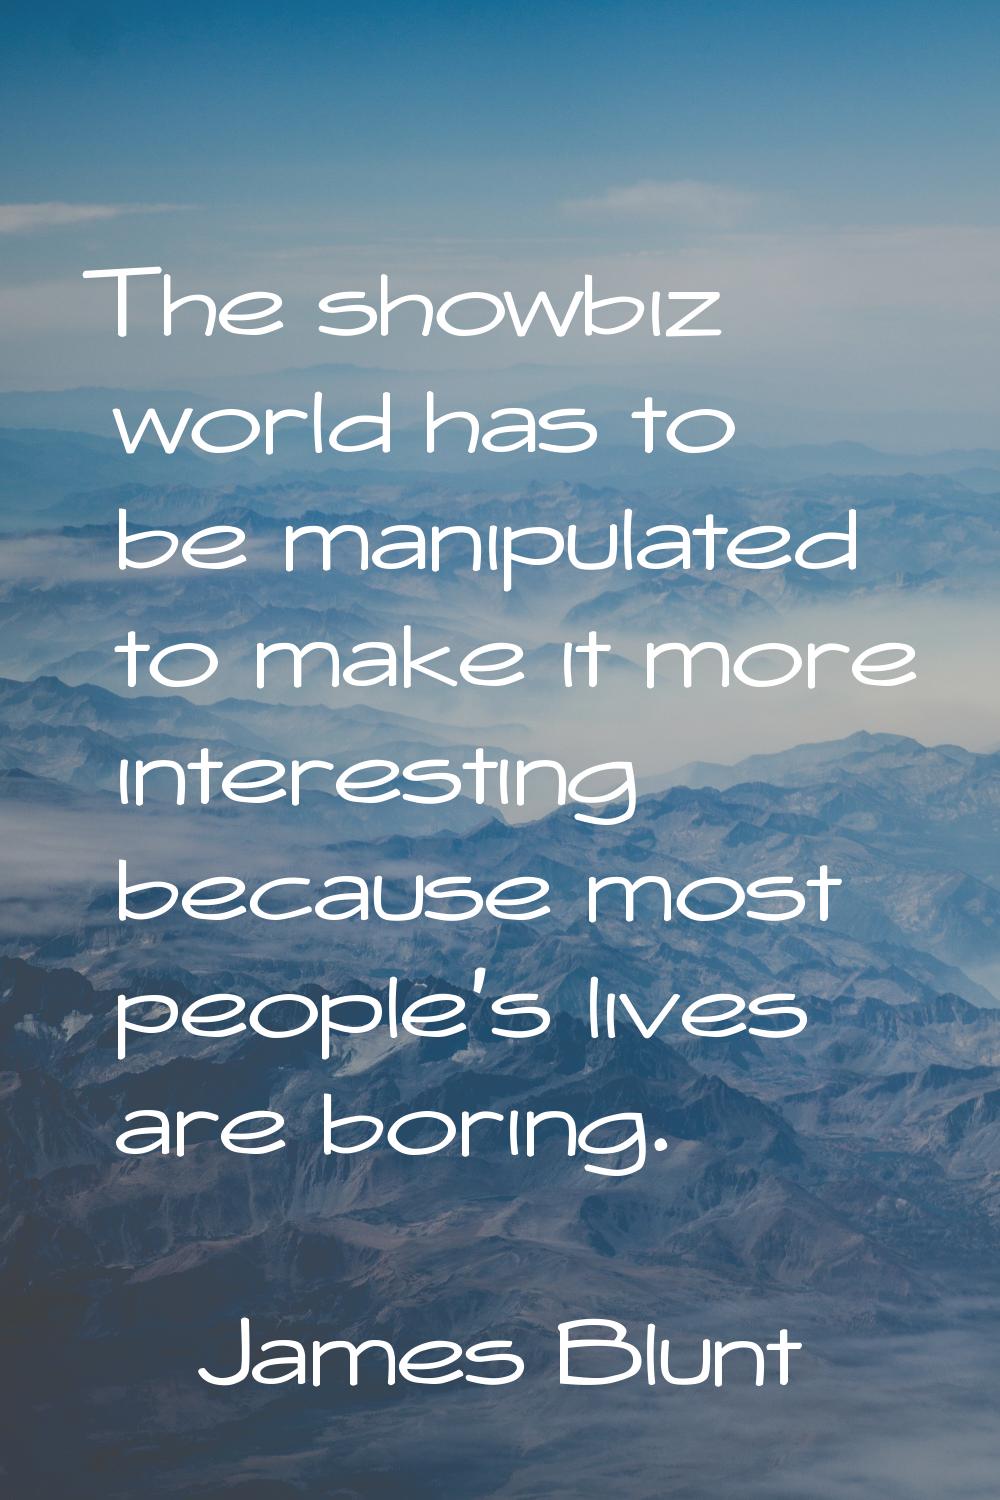 The showbiz world has to be manipulated to make it more interesting because most people's lives are